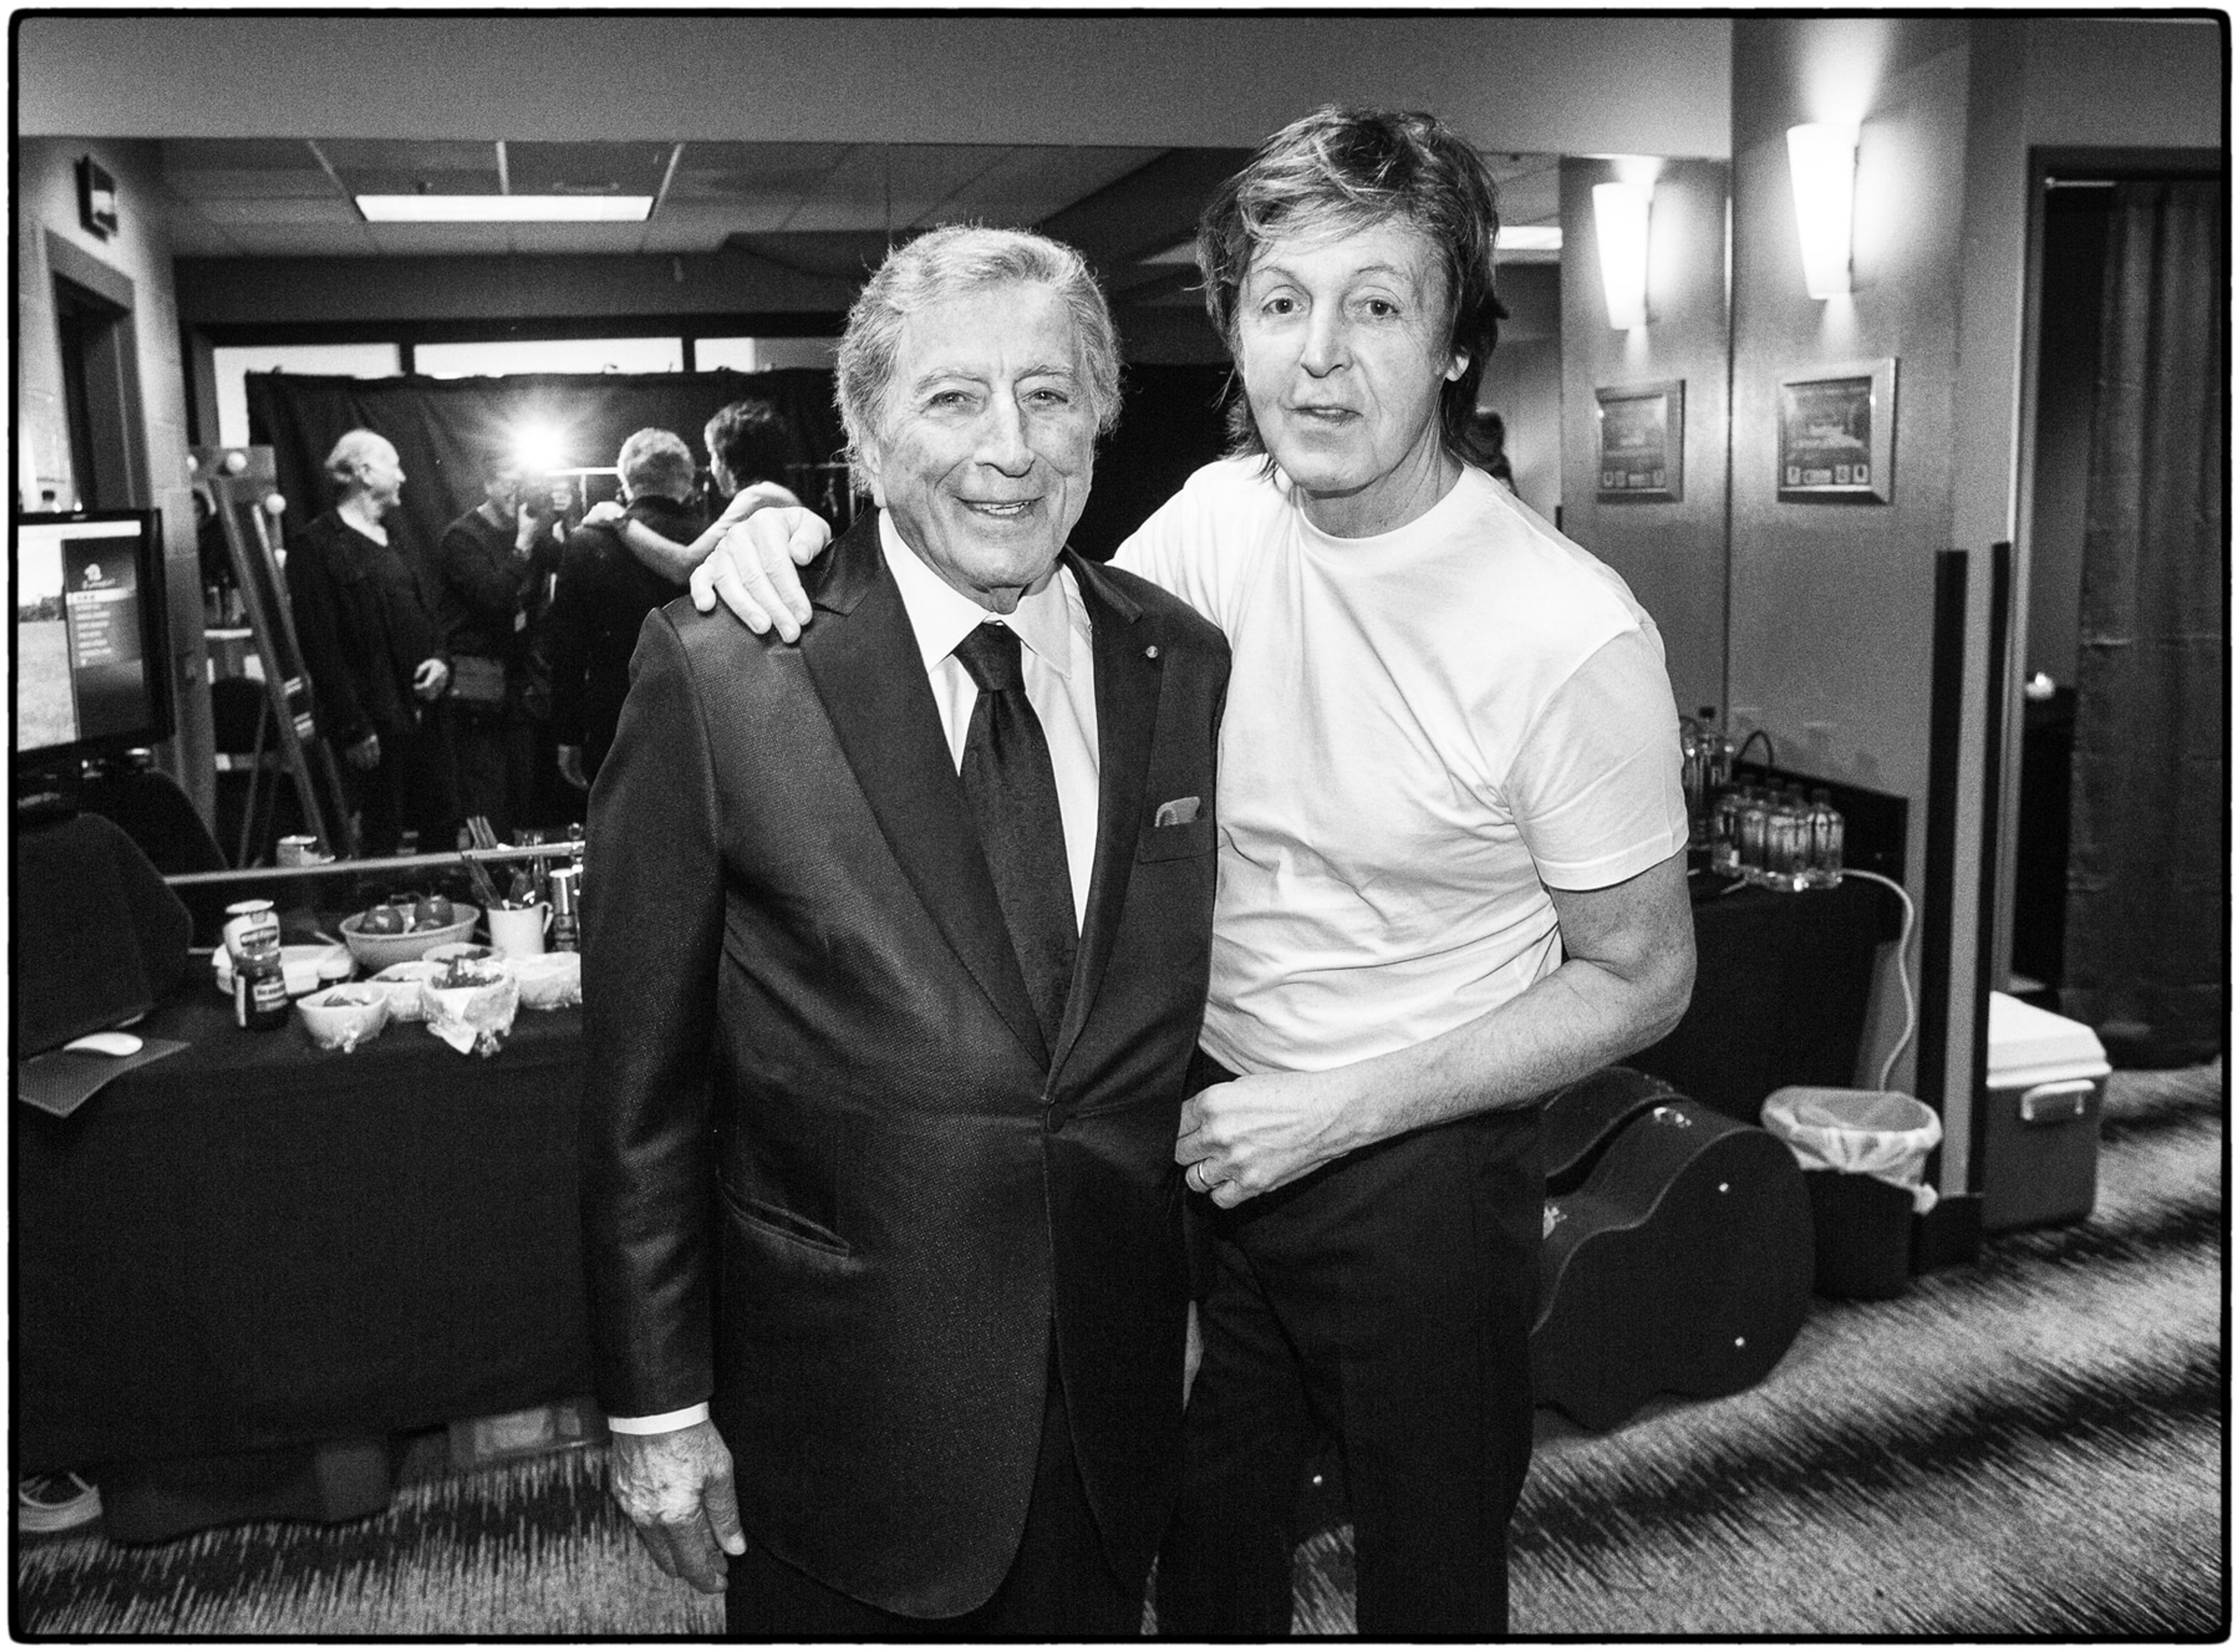 Black and white photo of Tony Bennett and Paul backstage in a dressing room